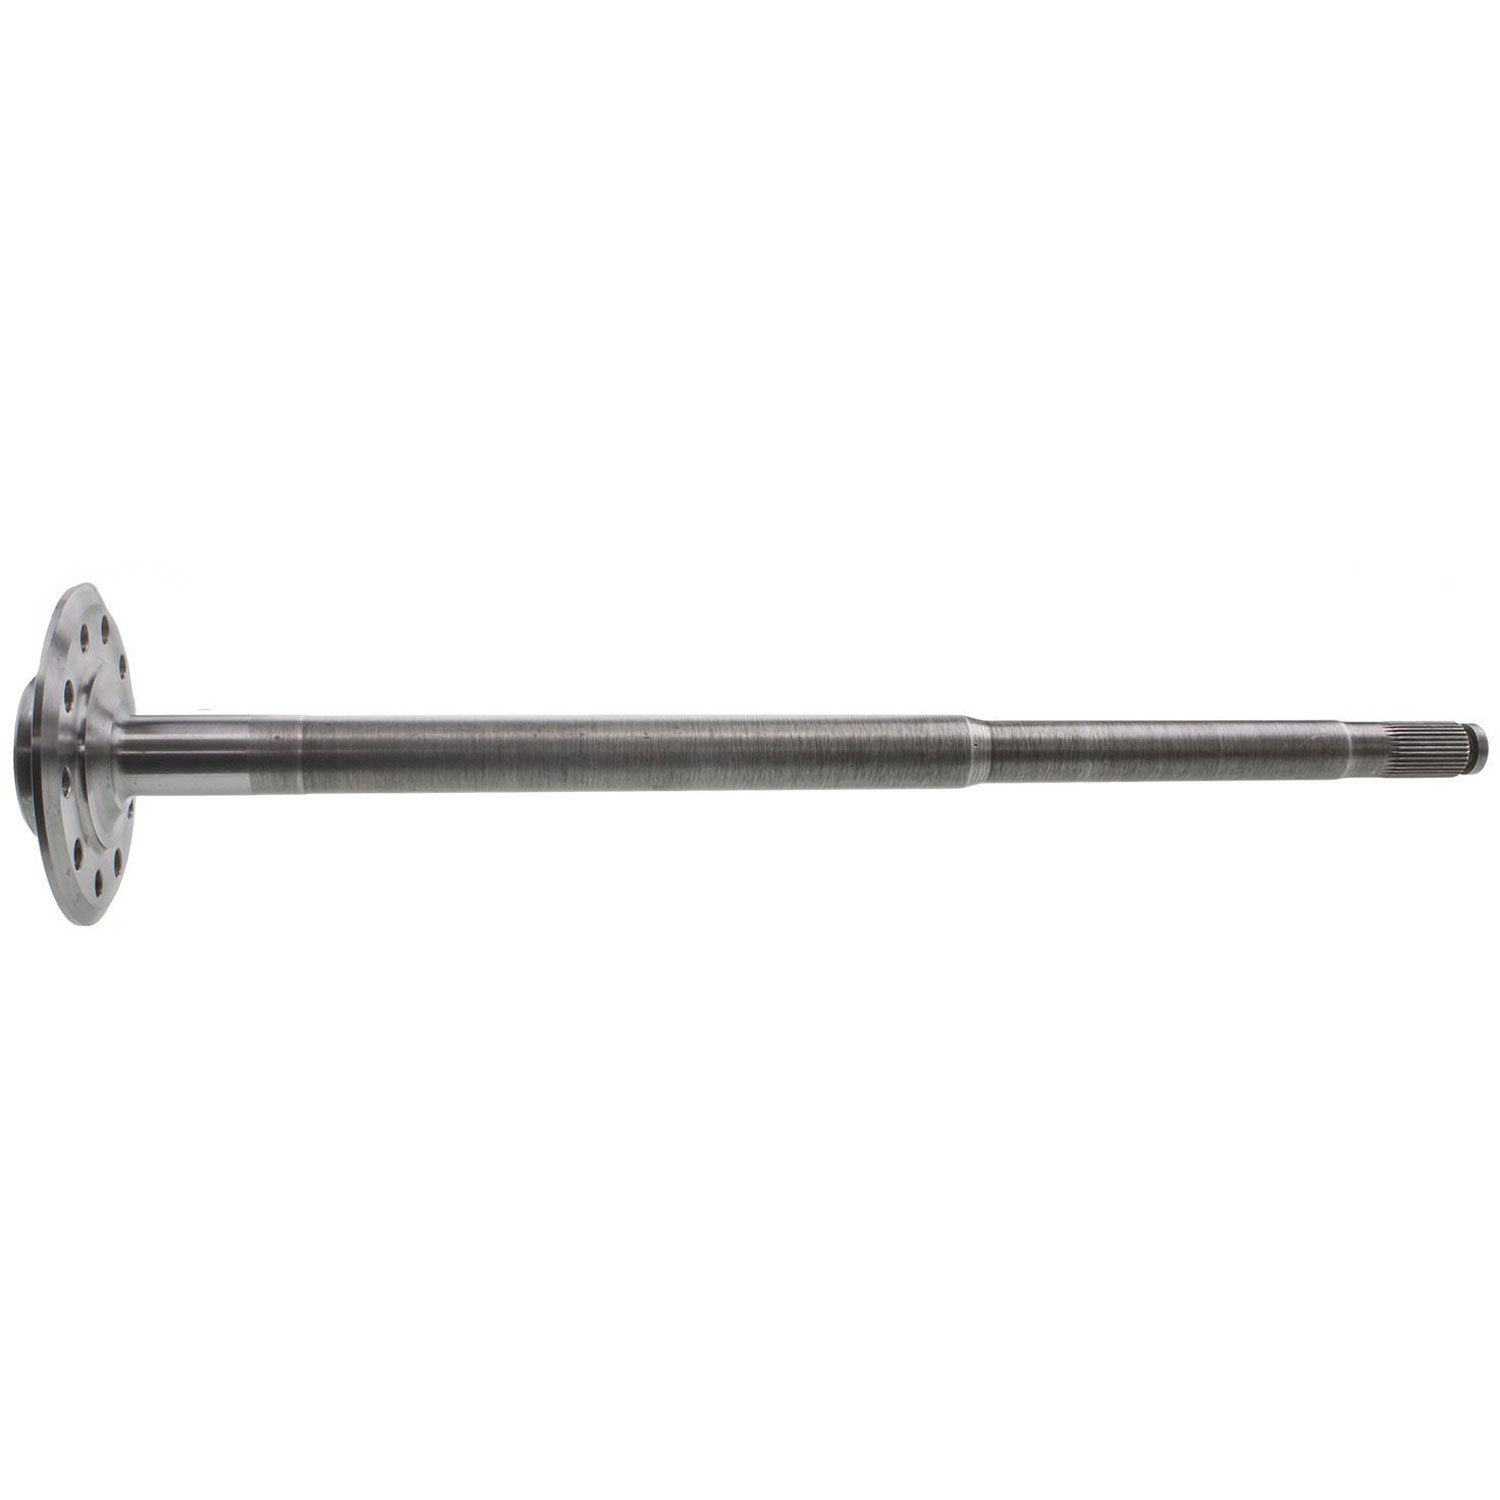 Axle Shaft; 31.75 in. Overall Length; 1.705in. Bearing Surface; Uses 6408 Bearing; 12/14mm Studs; 5